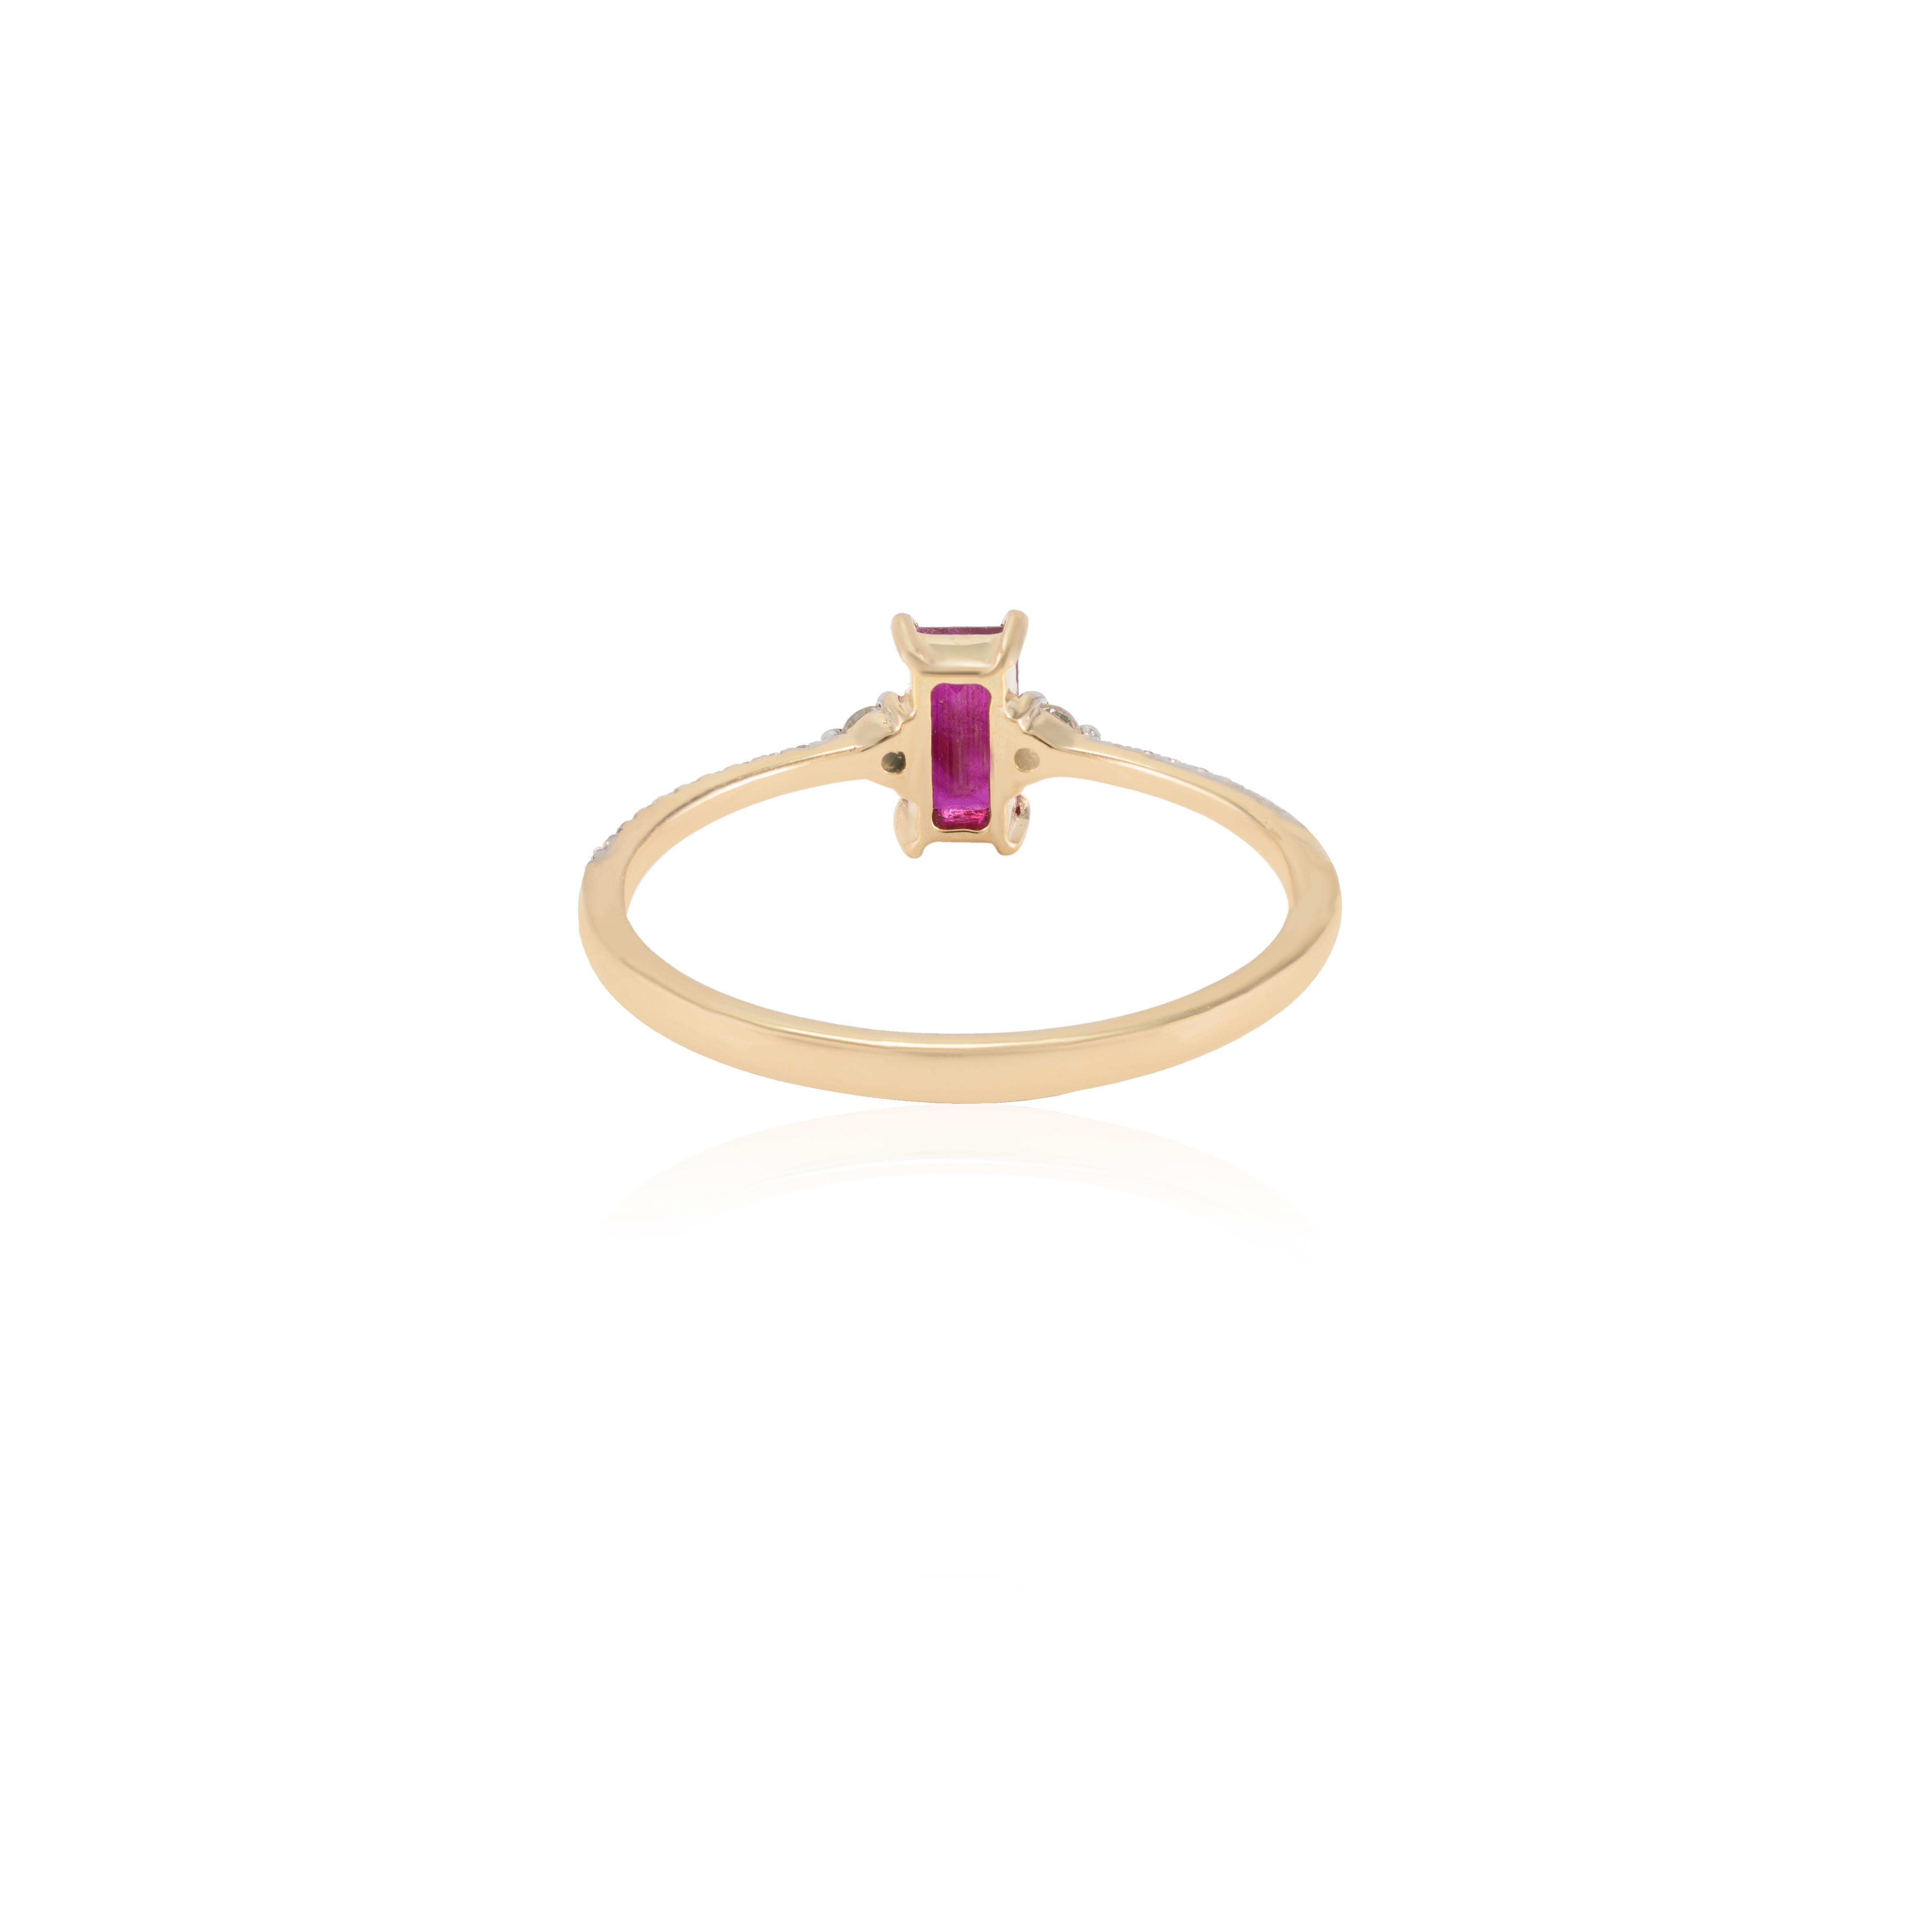 For Sale:  Baguette Cut Ruby and Diamond Stacking Ring in 14k Solid Yellow Gold For Her 6